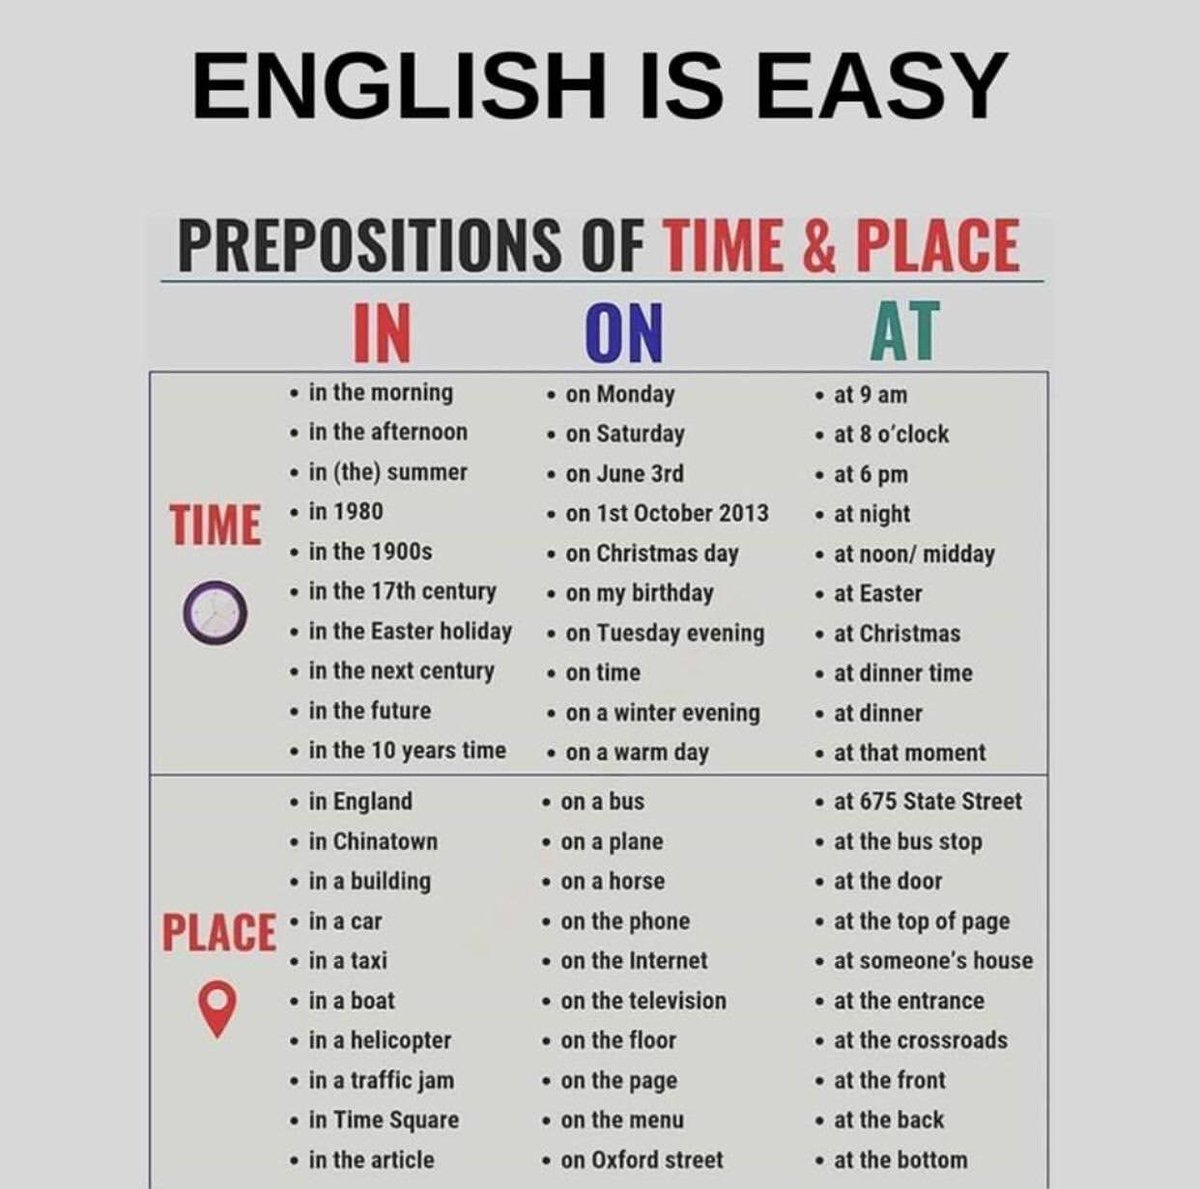 Prepositions after prepositions